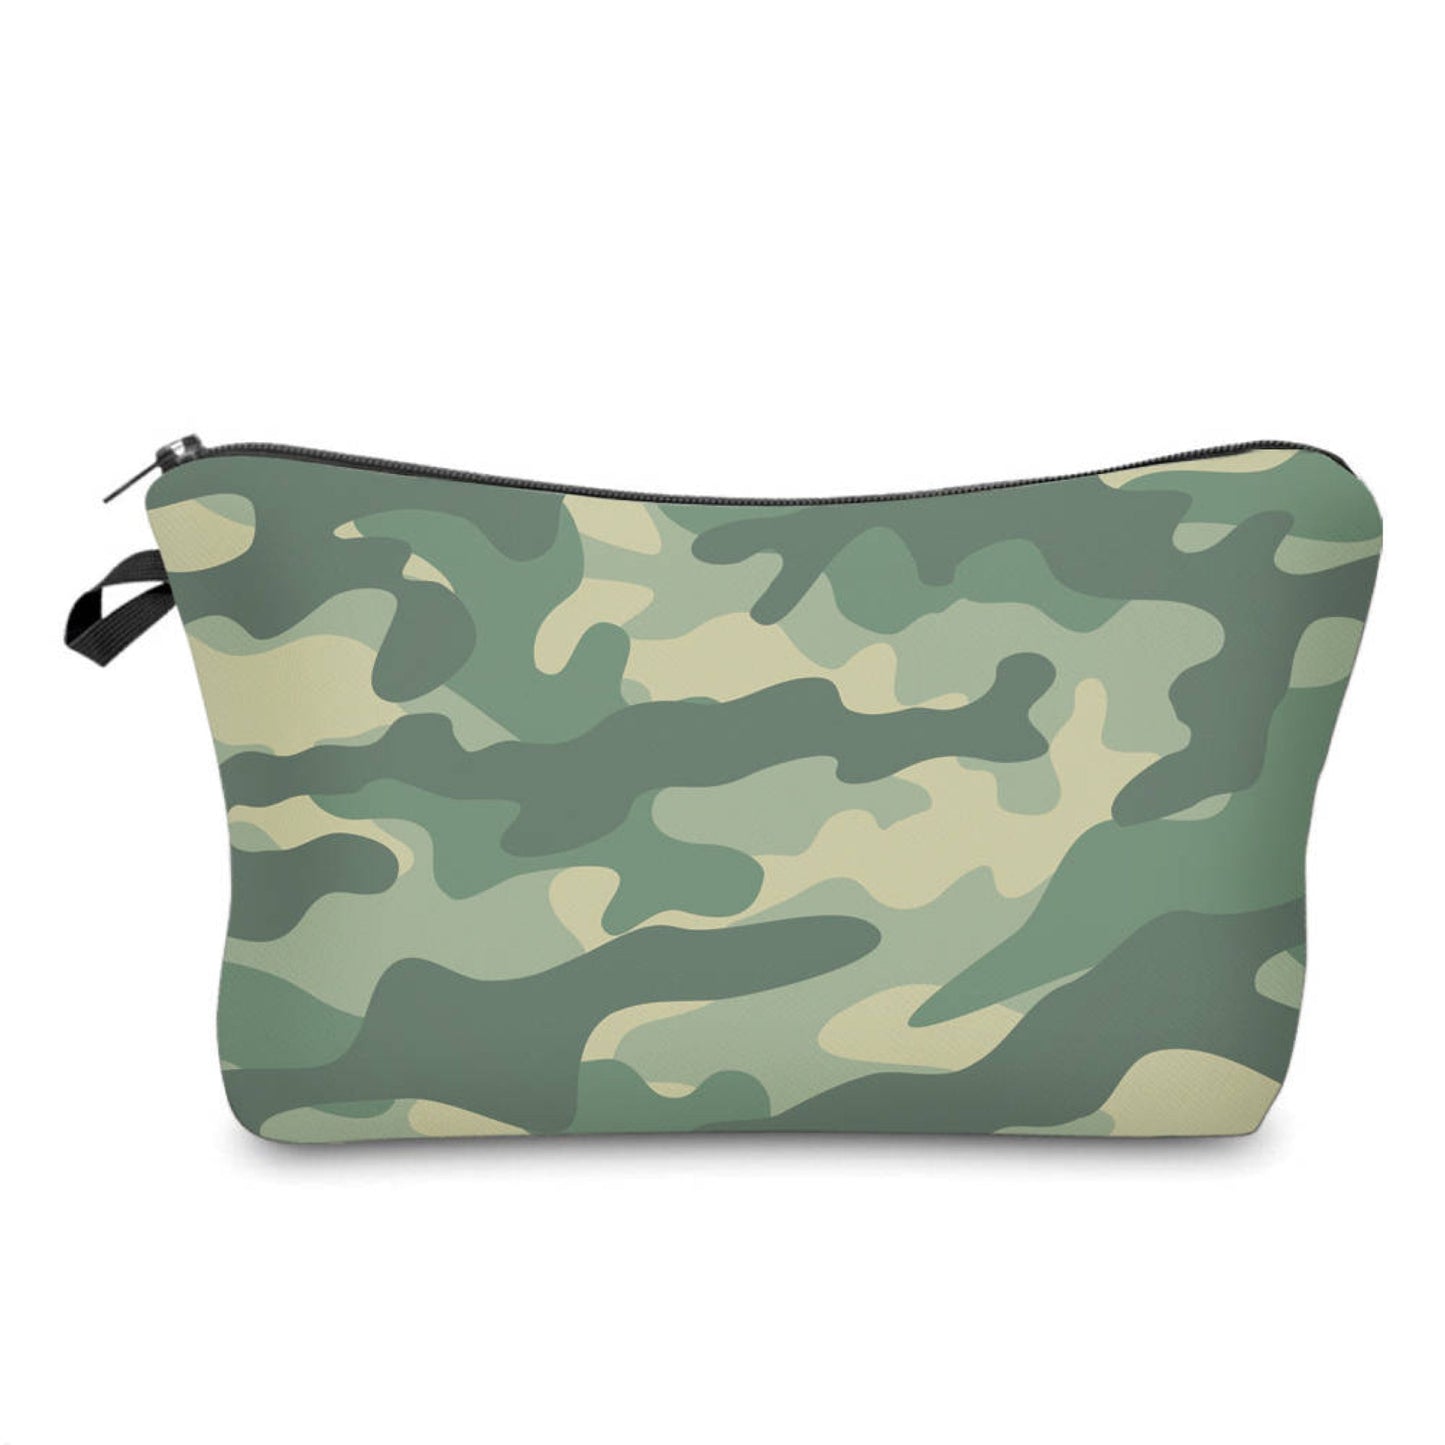 Pouch - Camo Muted Green